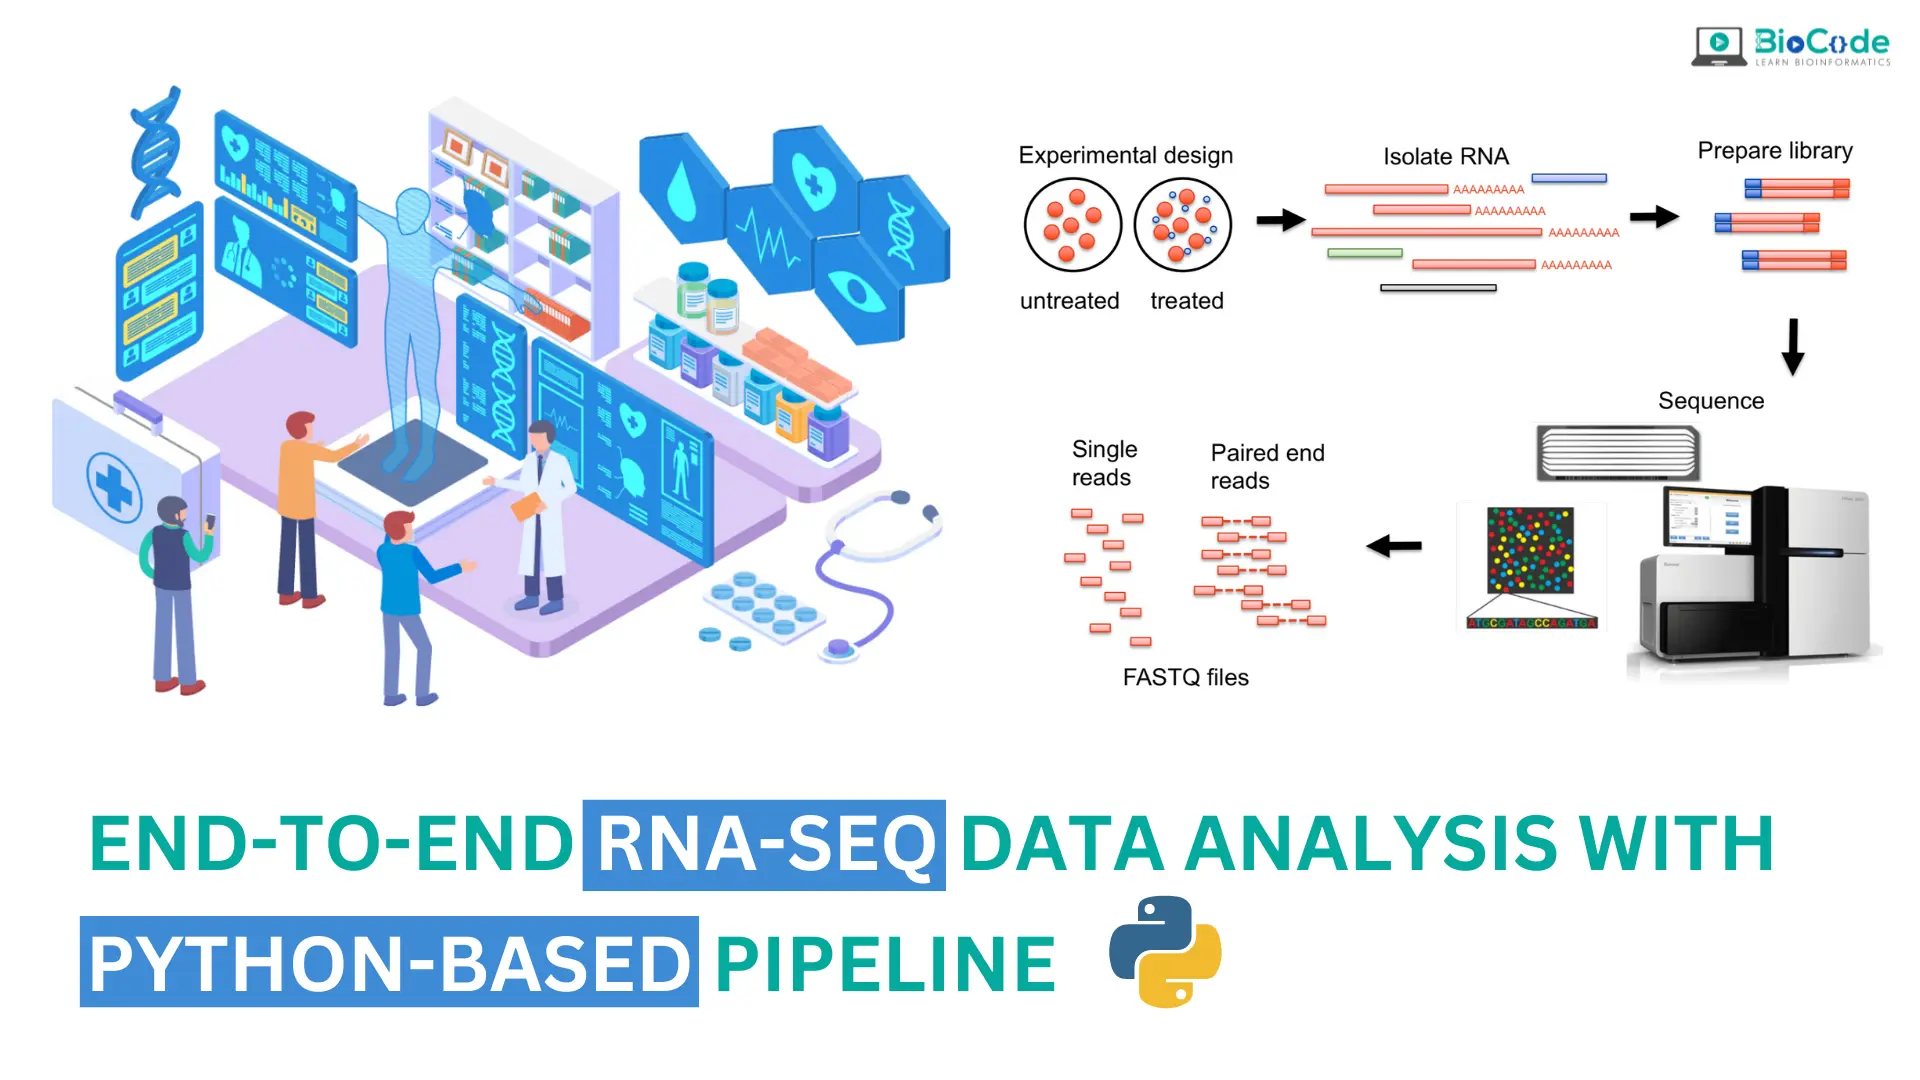 End-to-End RNA-Seq Data Analysis With Python-Based Pipeline